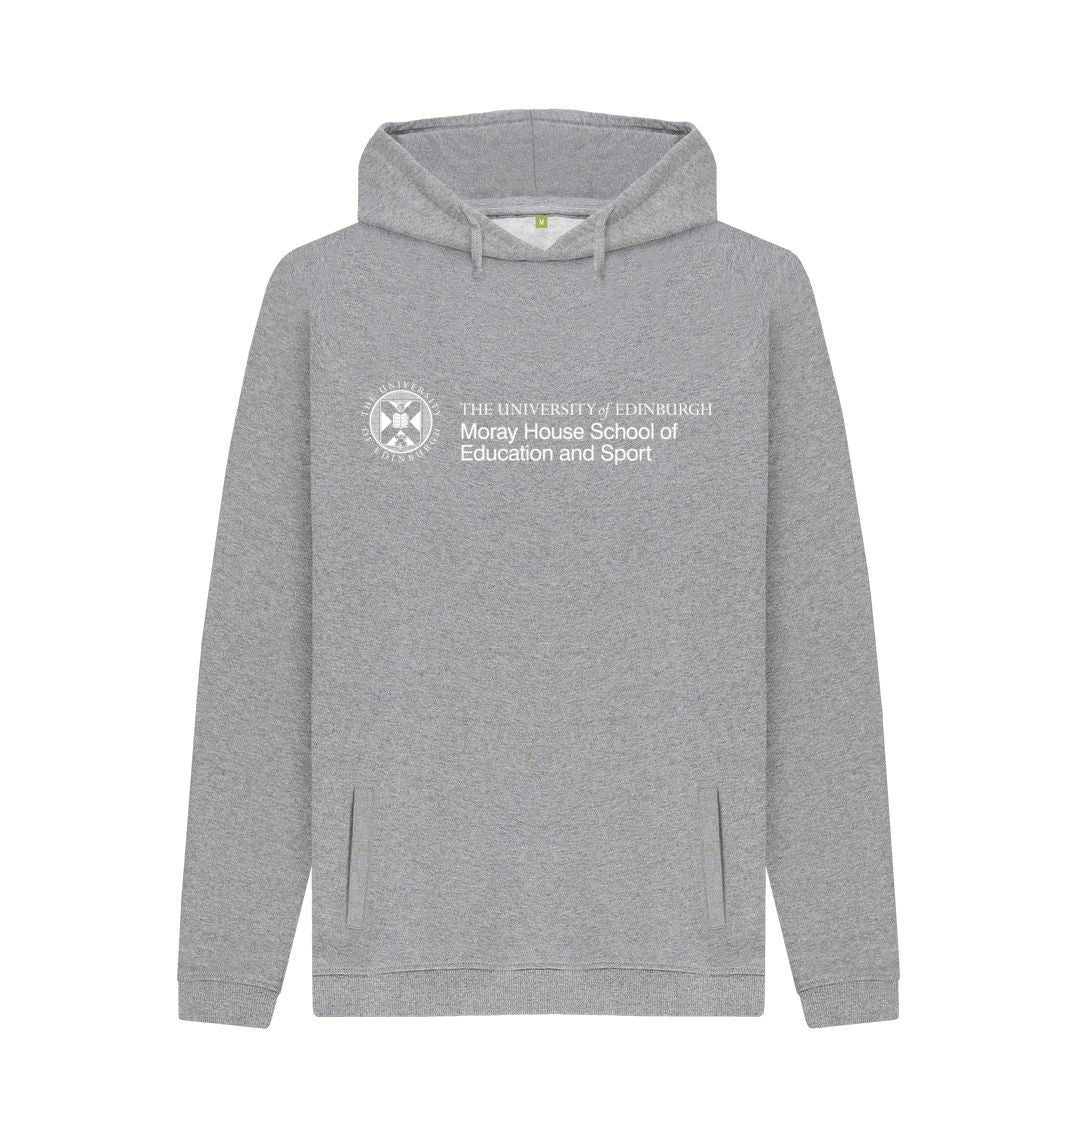 Light Heather Moray House School of Education and Sport Hoodie